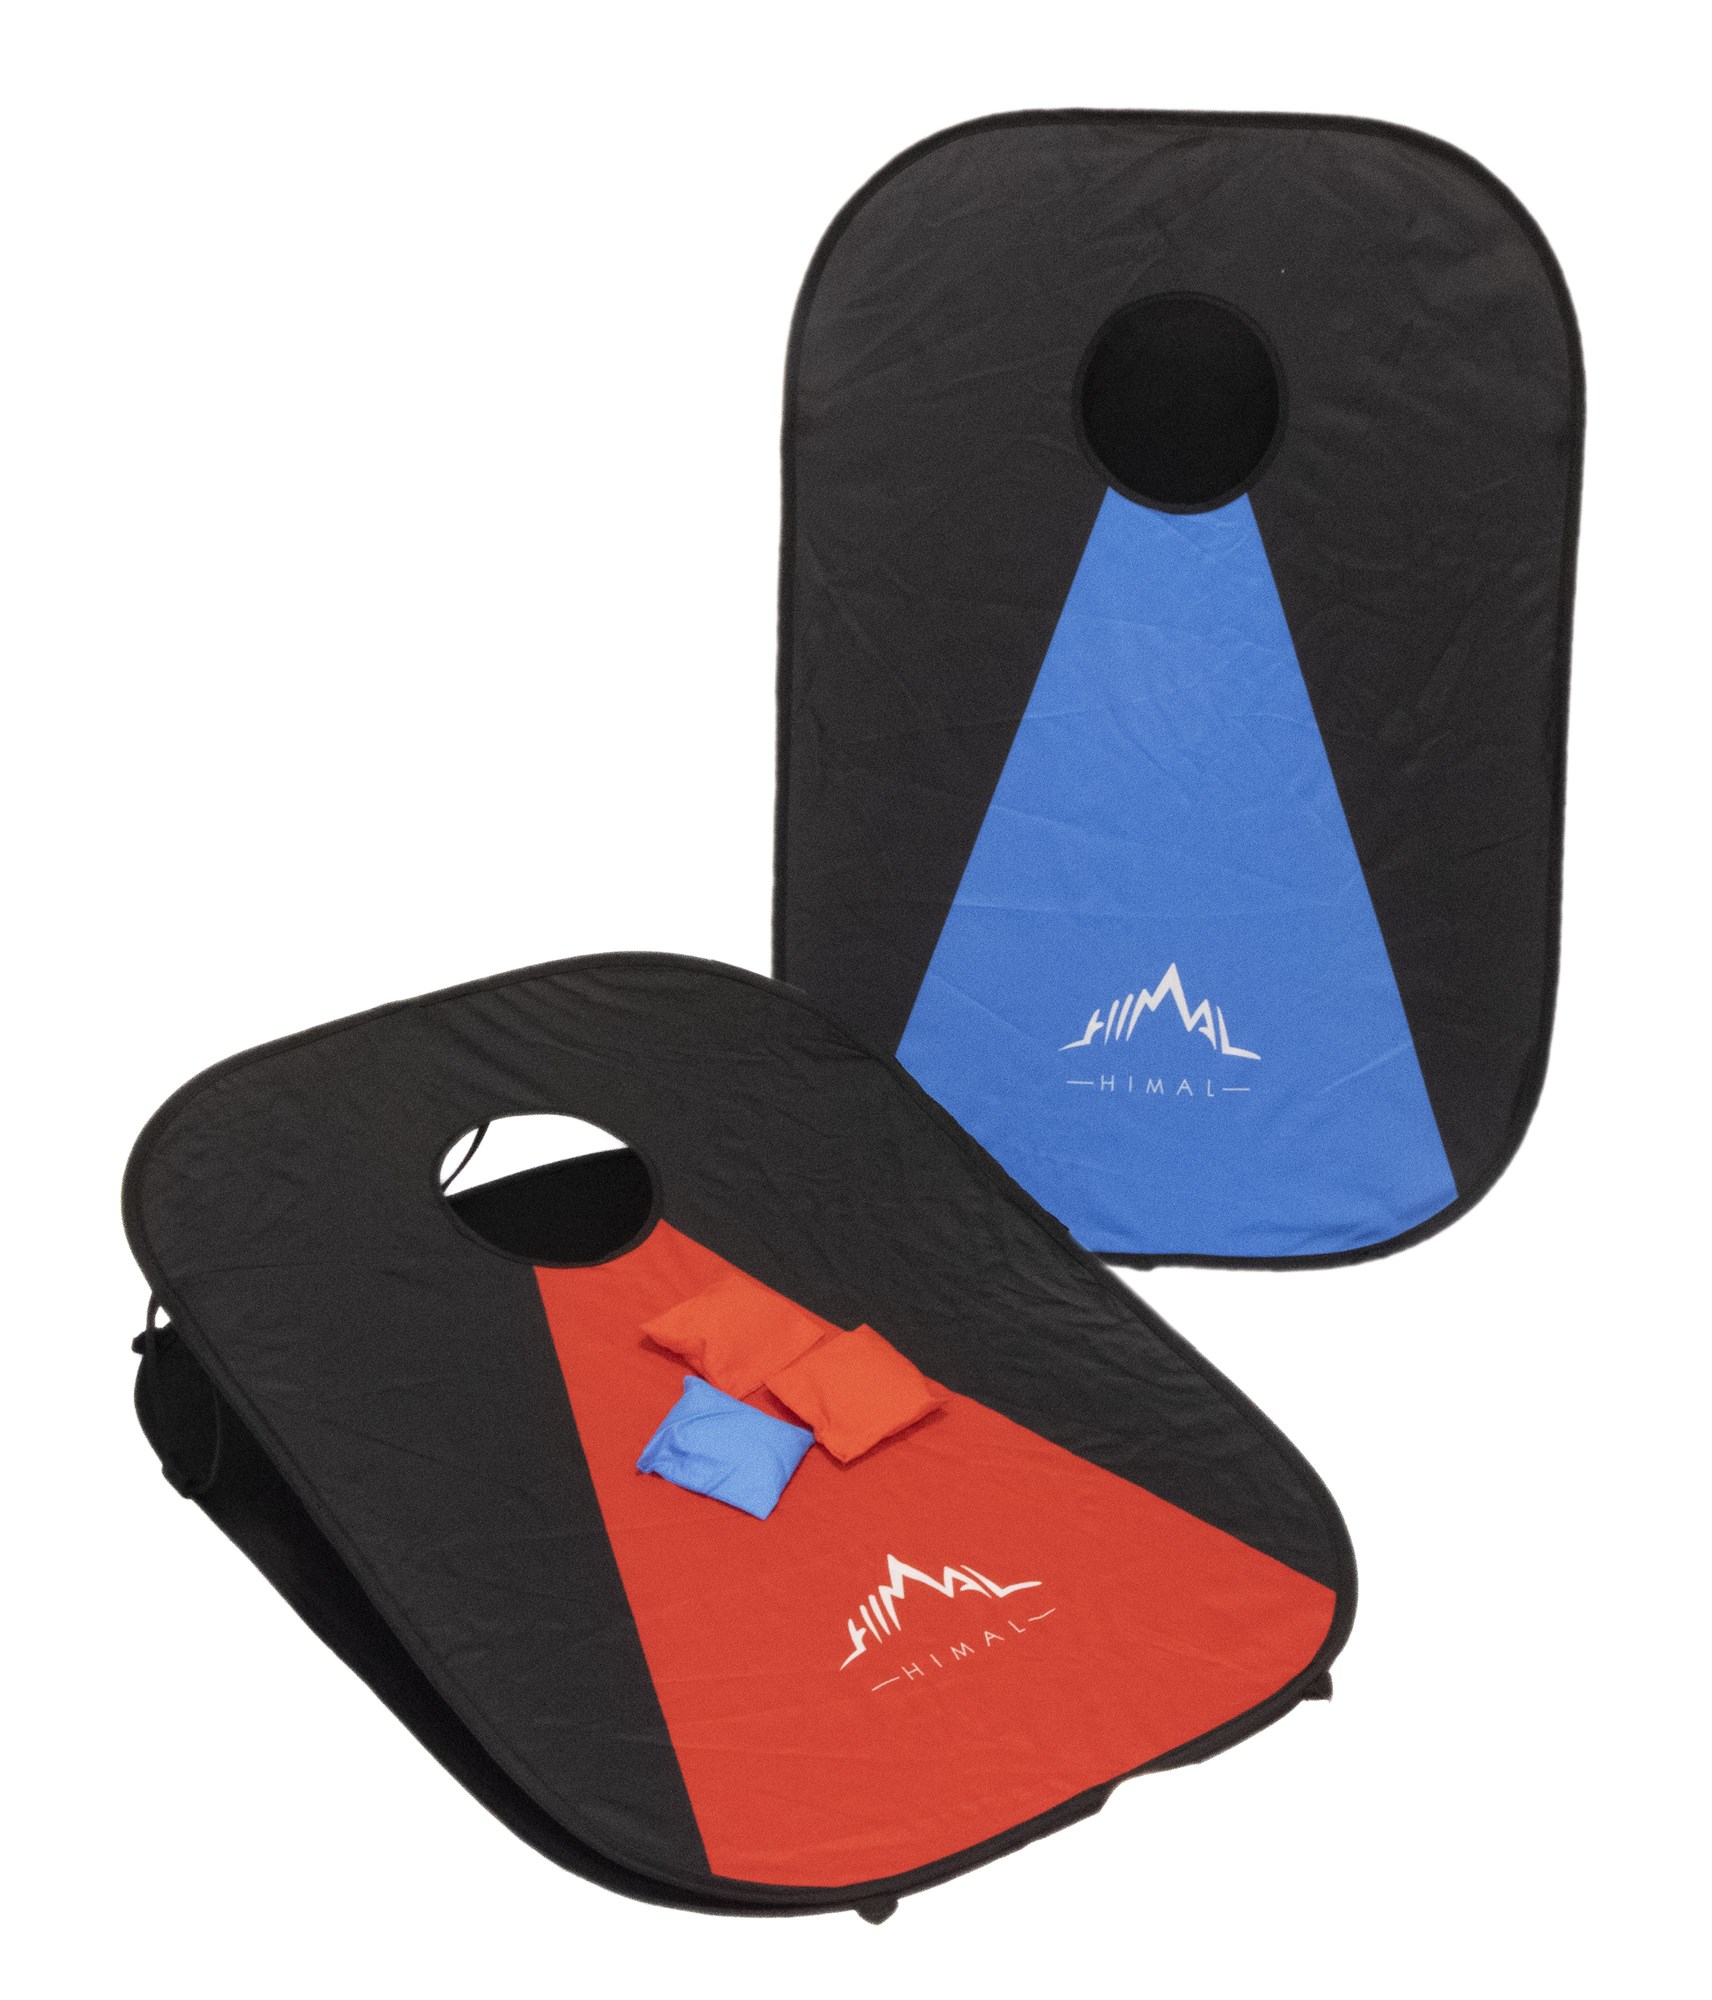 Collapsible Cornhole game